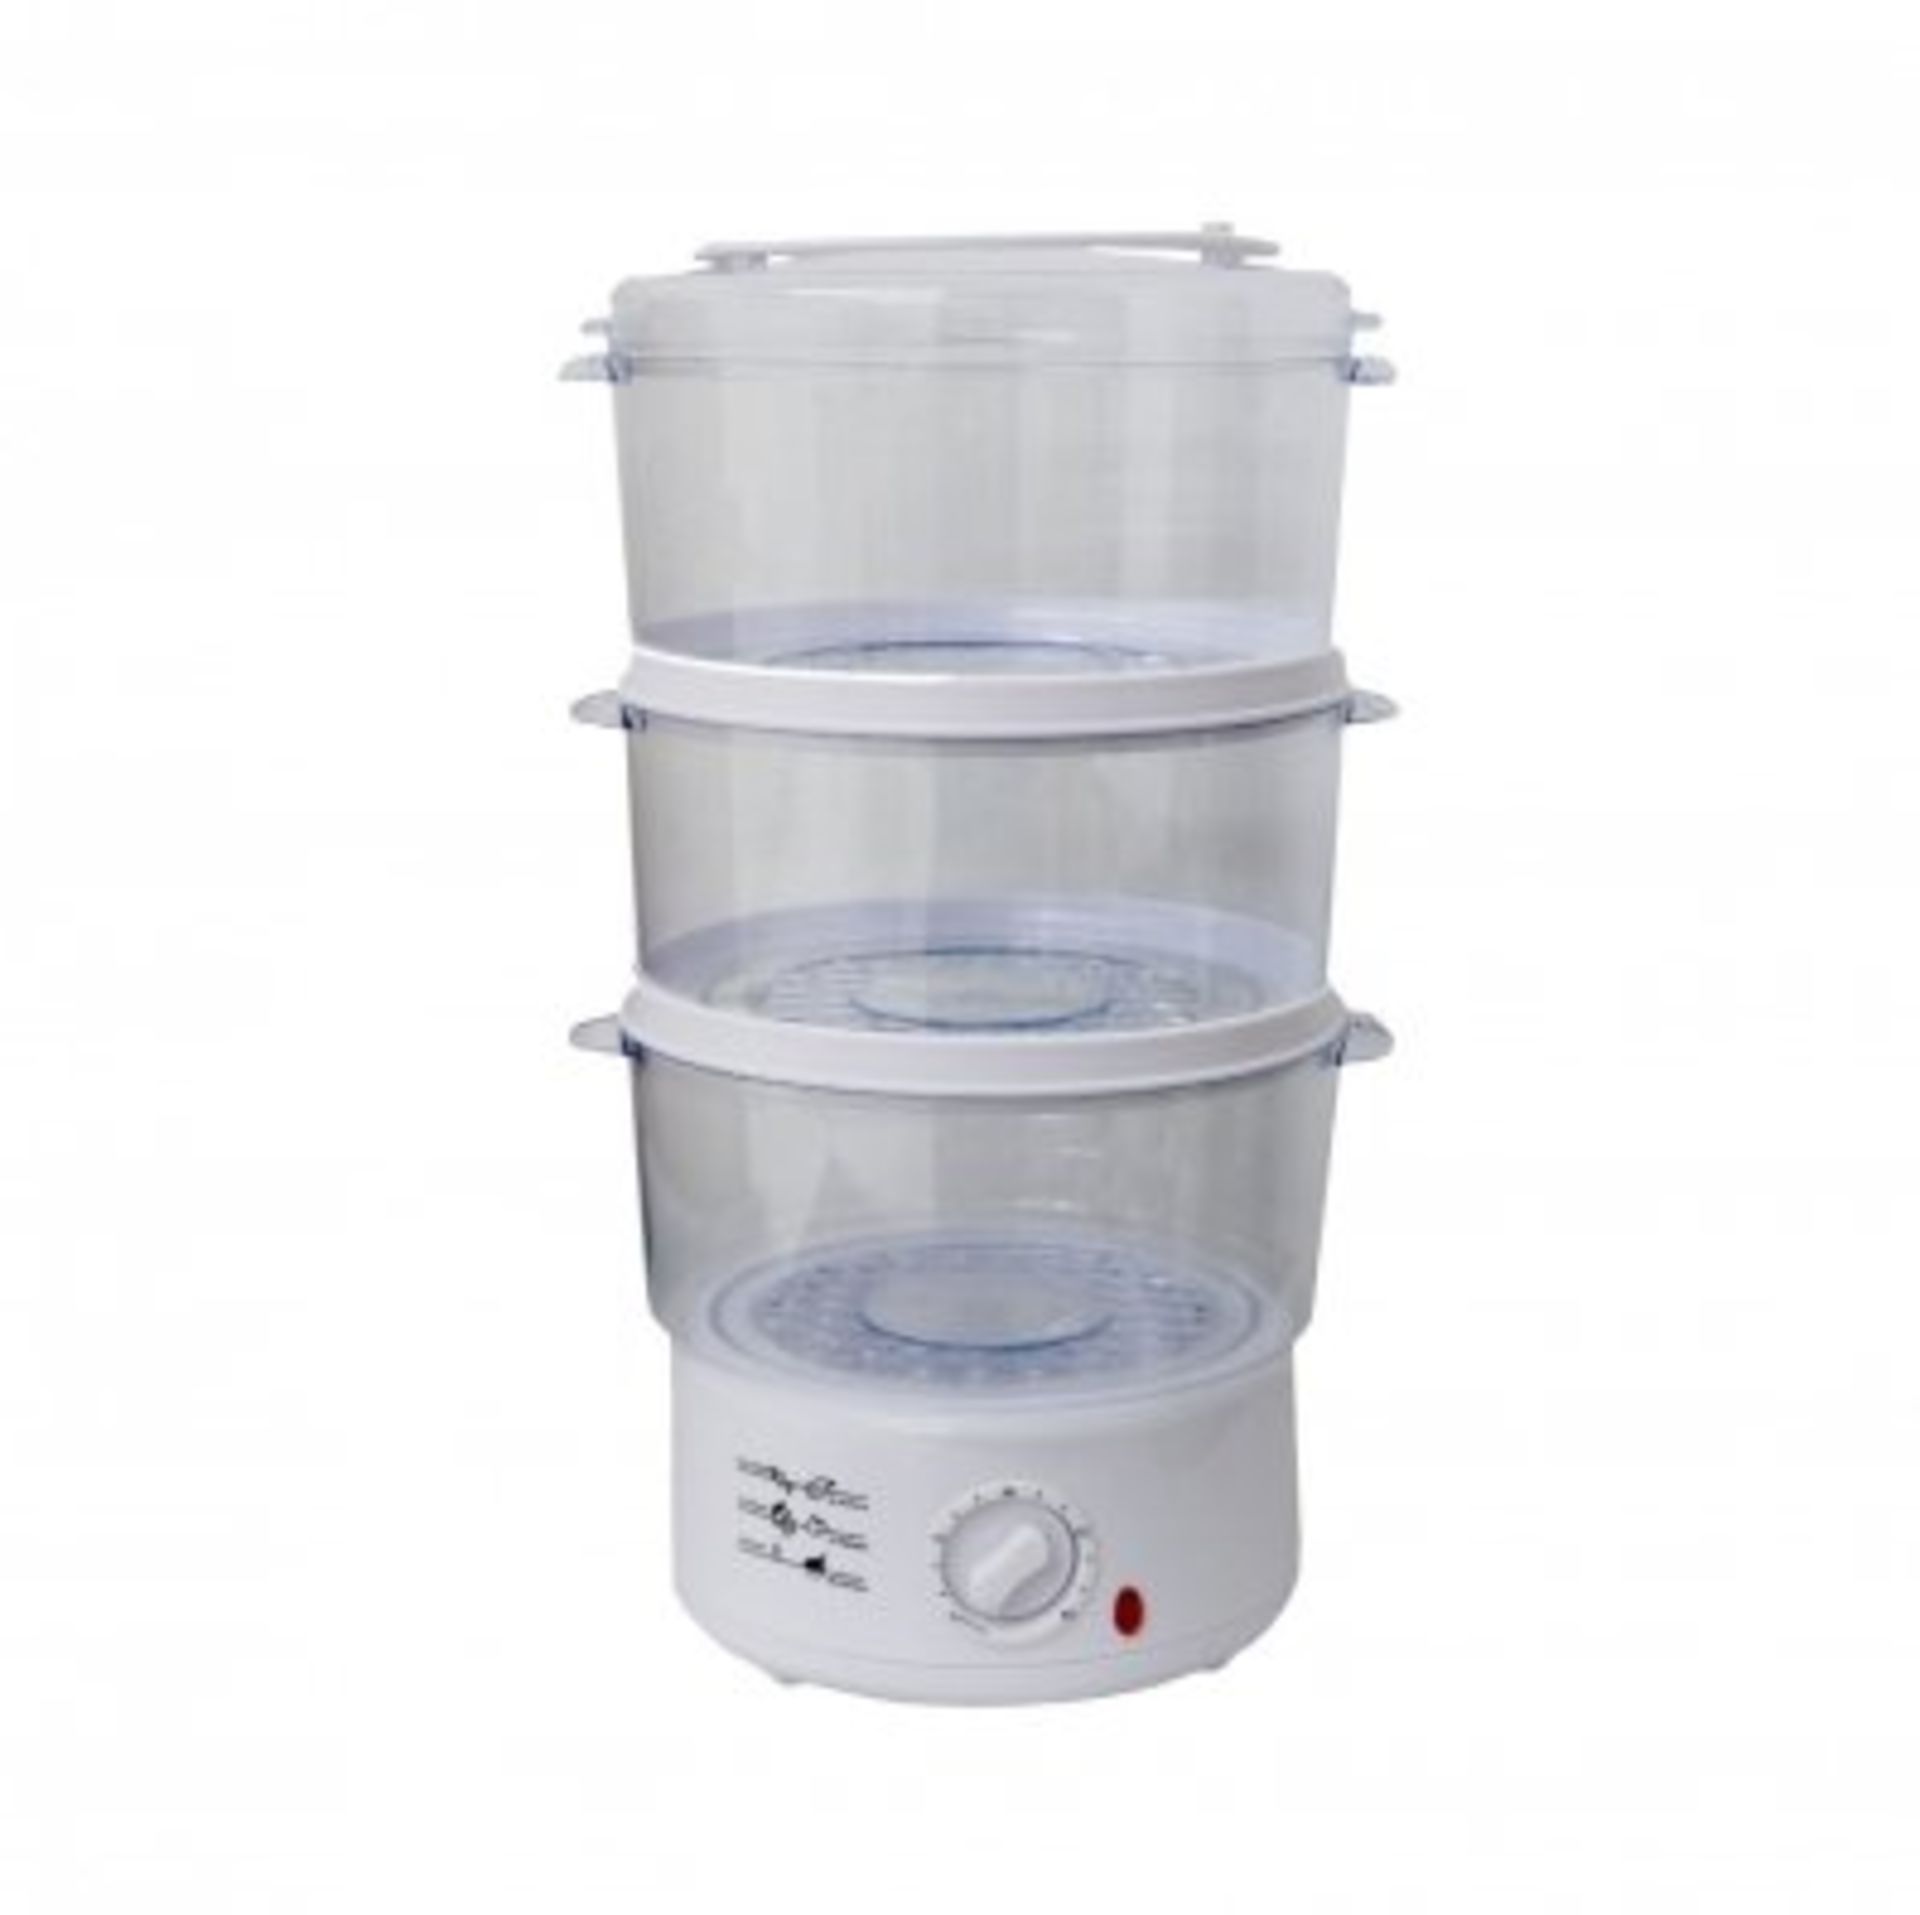 (LF4) 3 Layer 7.5L Compact Electric Food Steamer Steam Cooker The food steamer is the perfec...